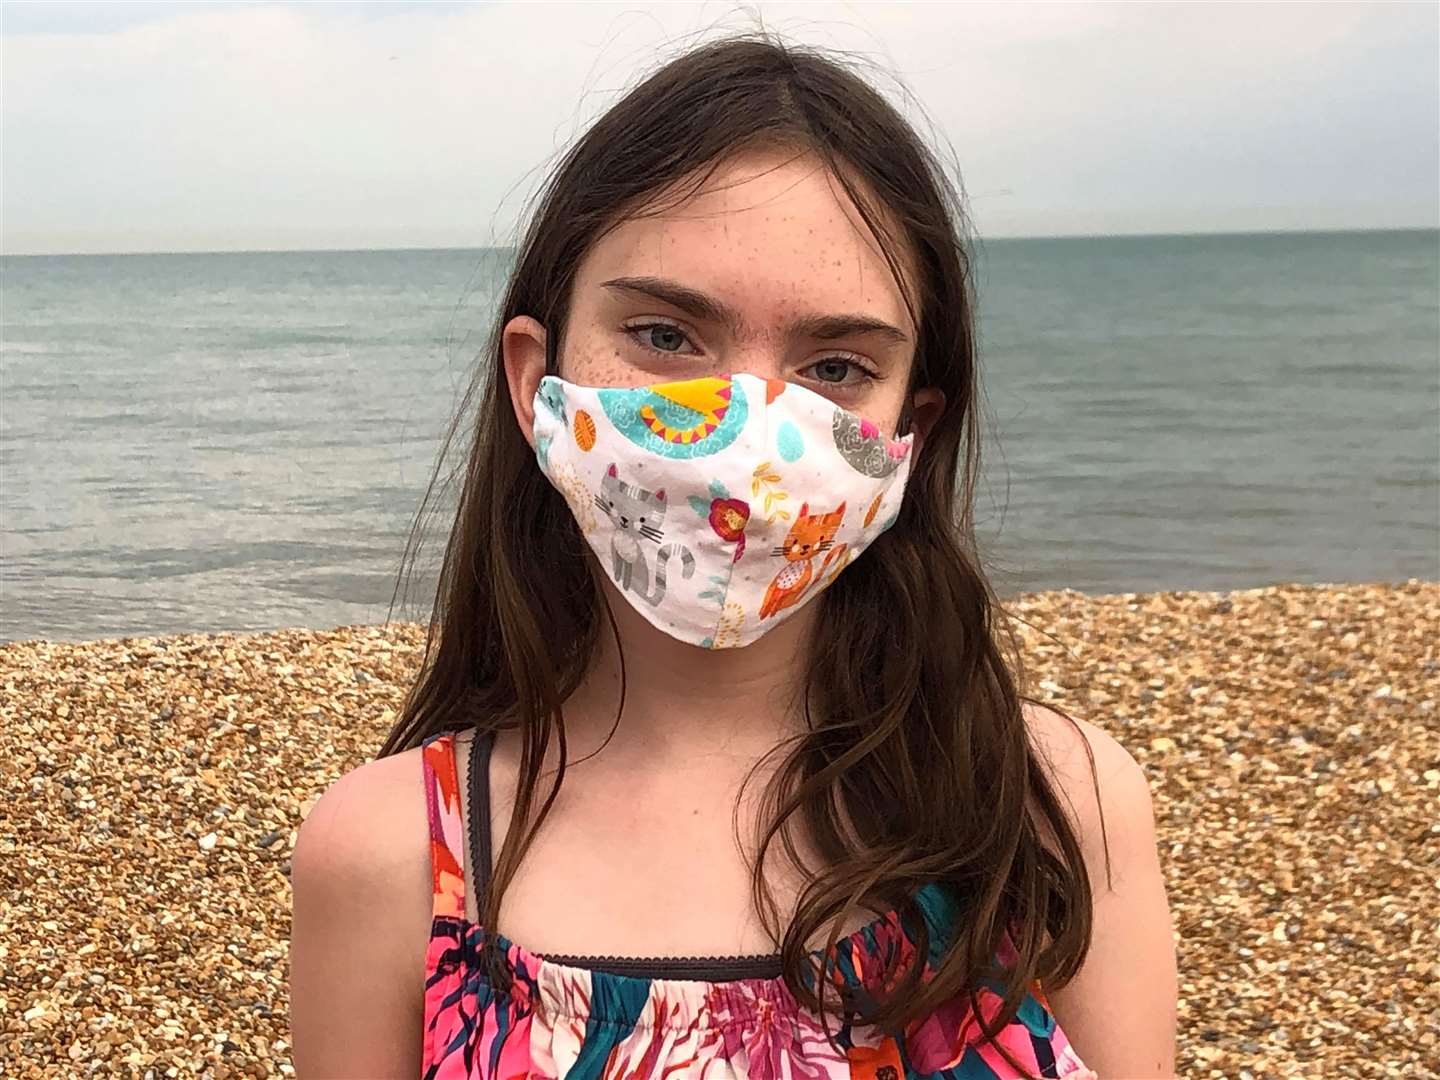 Pat Wilson's granddaughter Timi, aged 11, was inspired by her gran to make masks for her friends